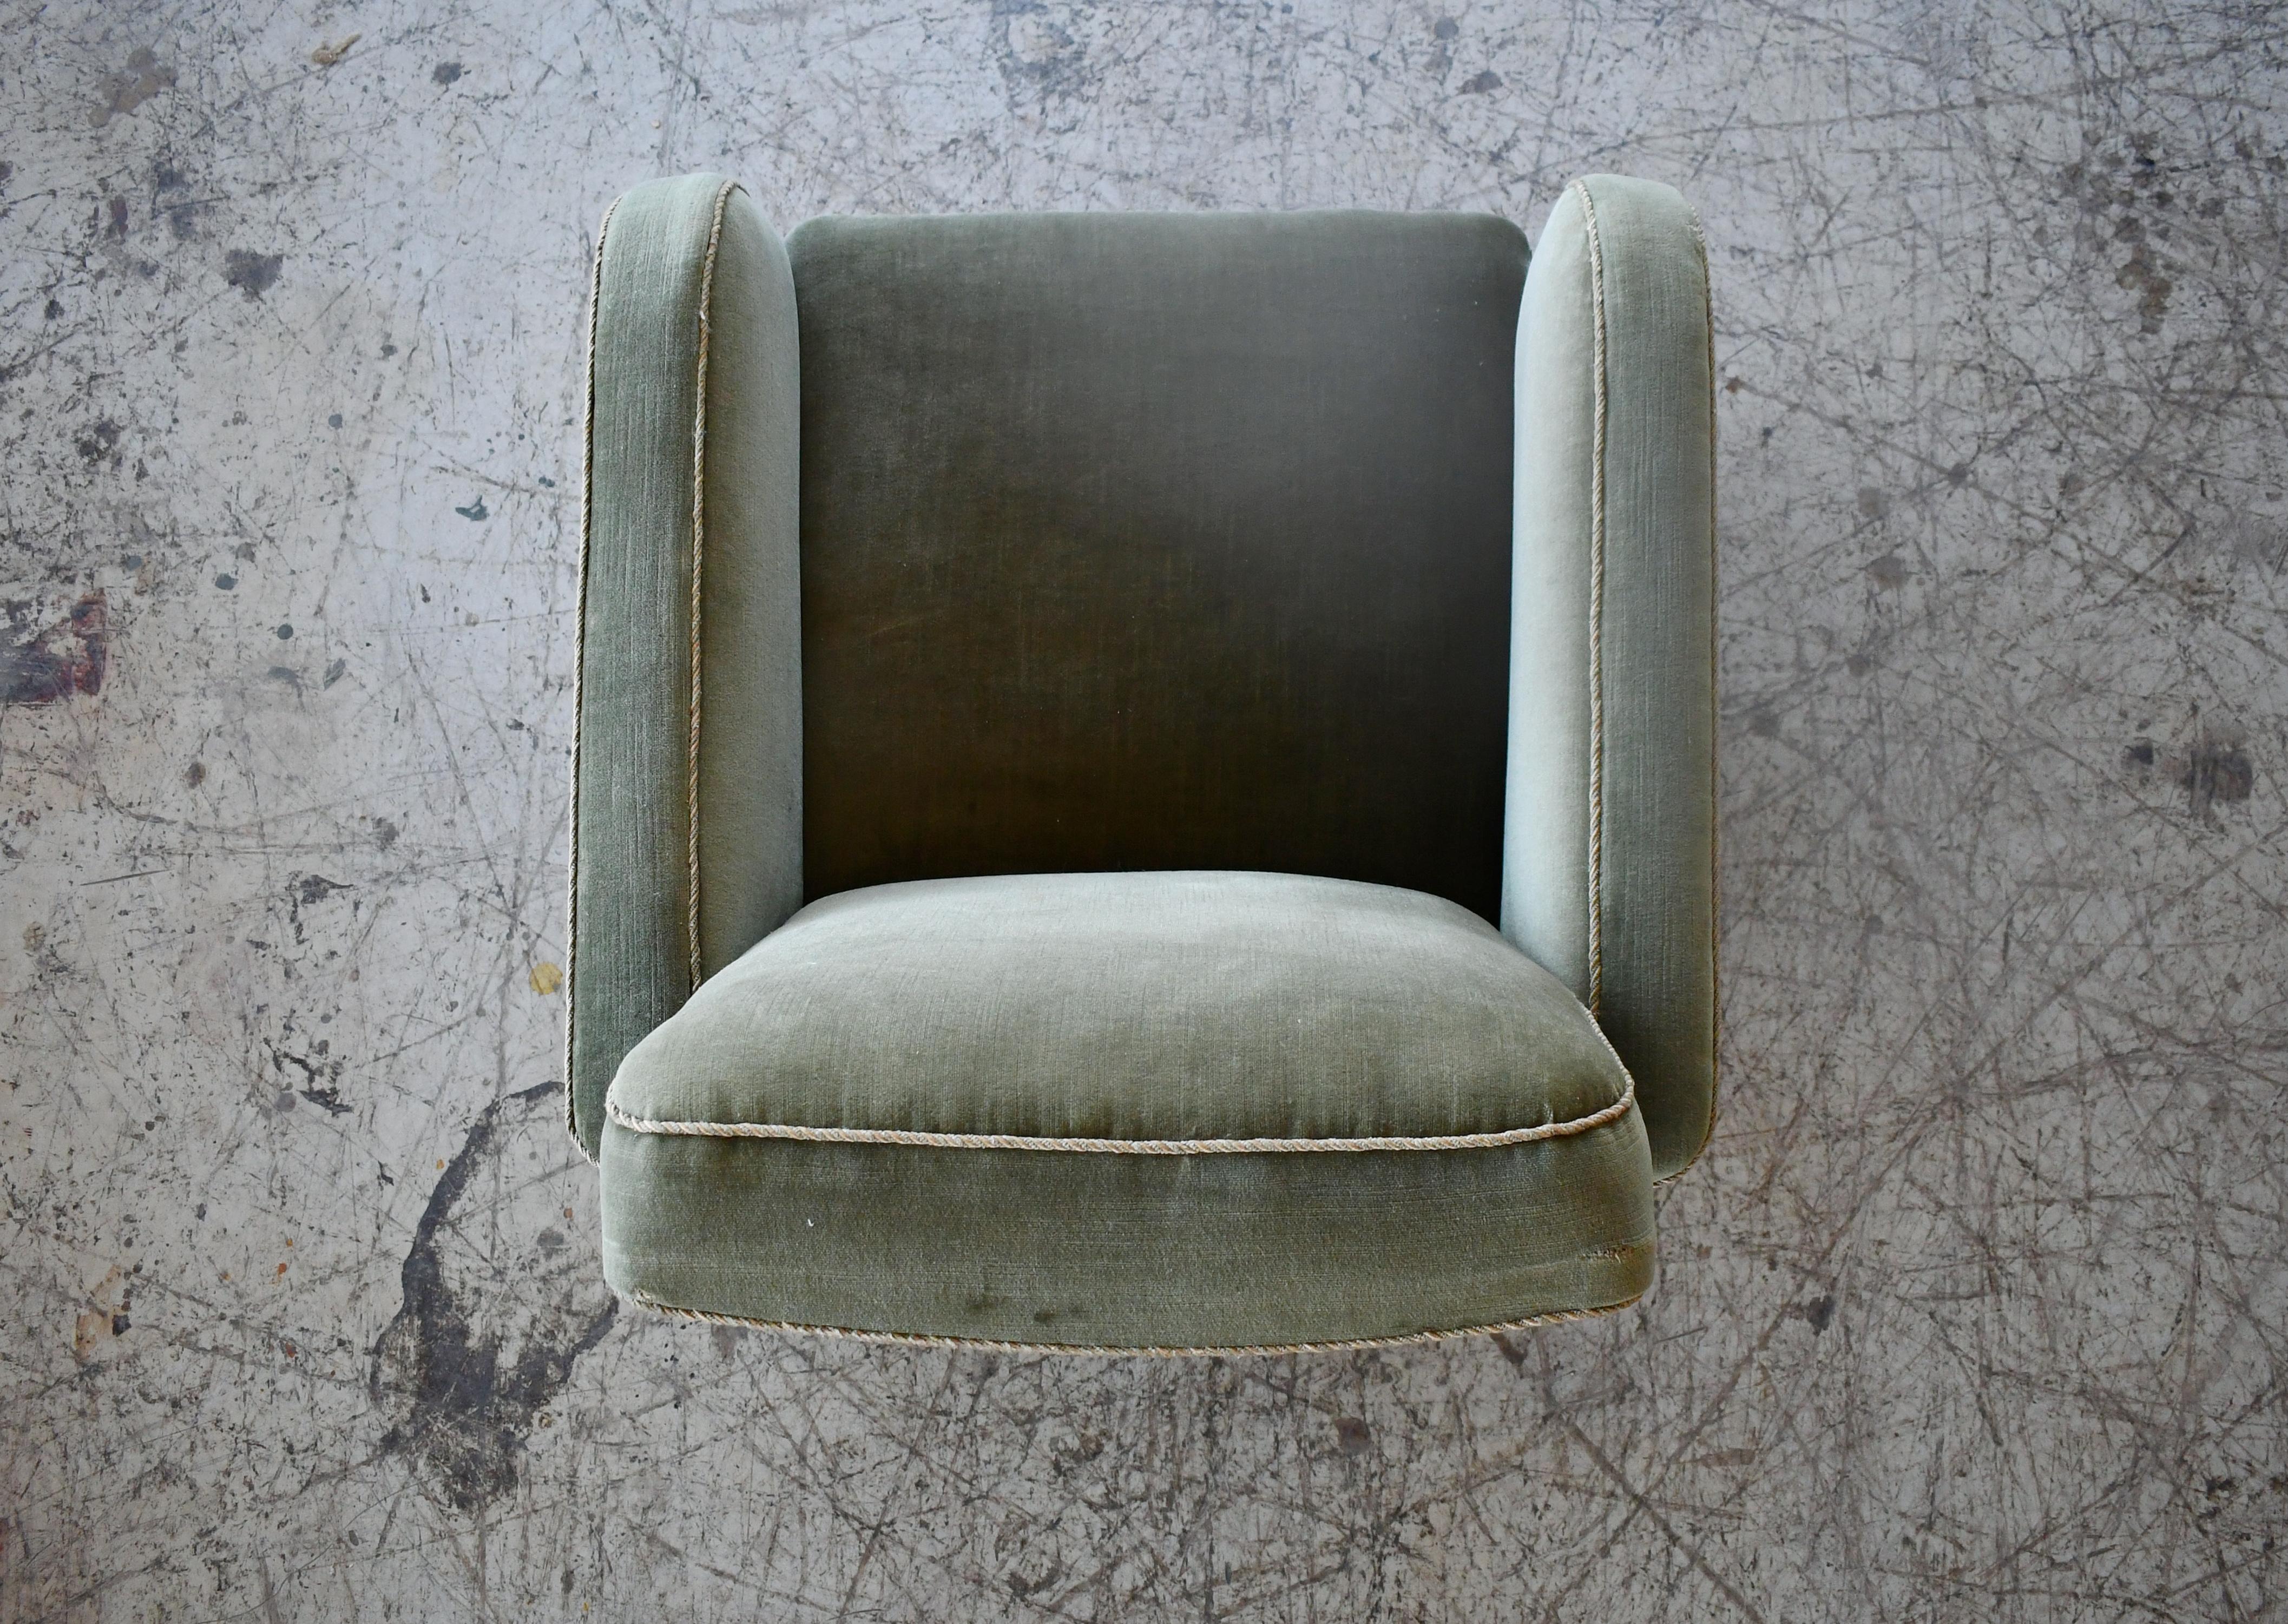 1930-40s Danish Art Deco or Early Midcentury Lounge Chair in Green Mohair For Sale 2